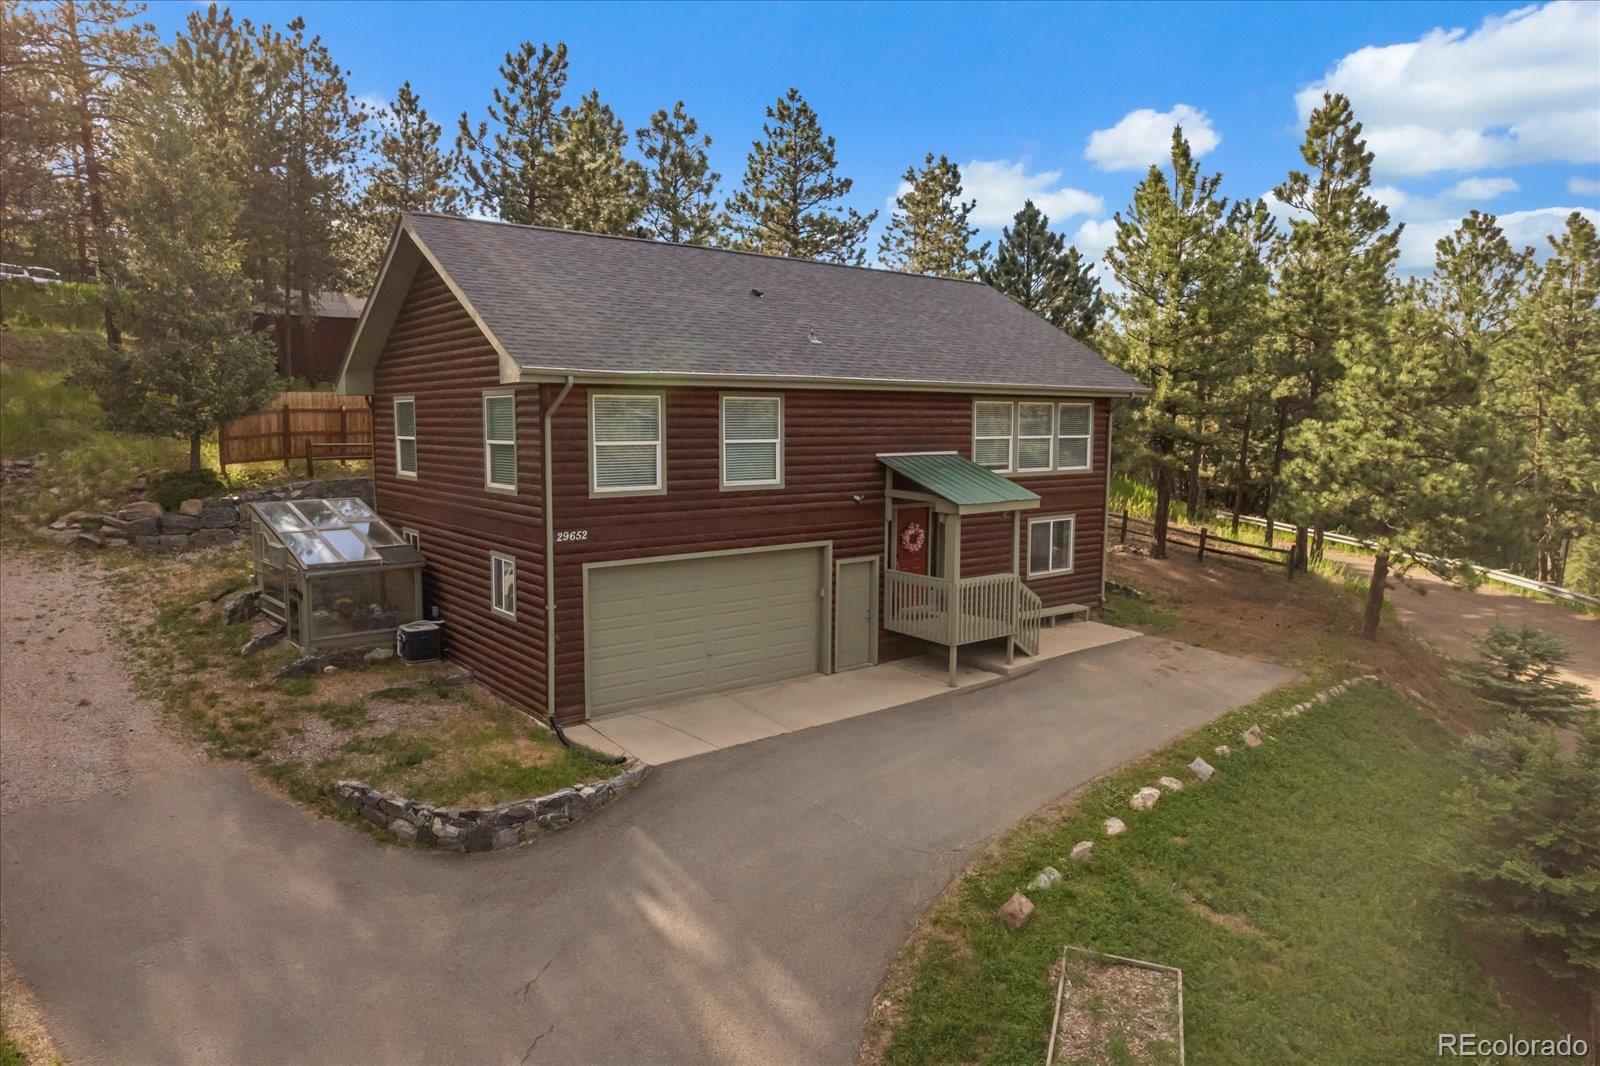 Report Image for 29652  Spruce Road,Evergreen, Colorado